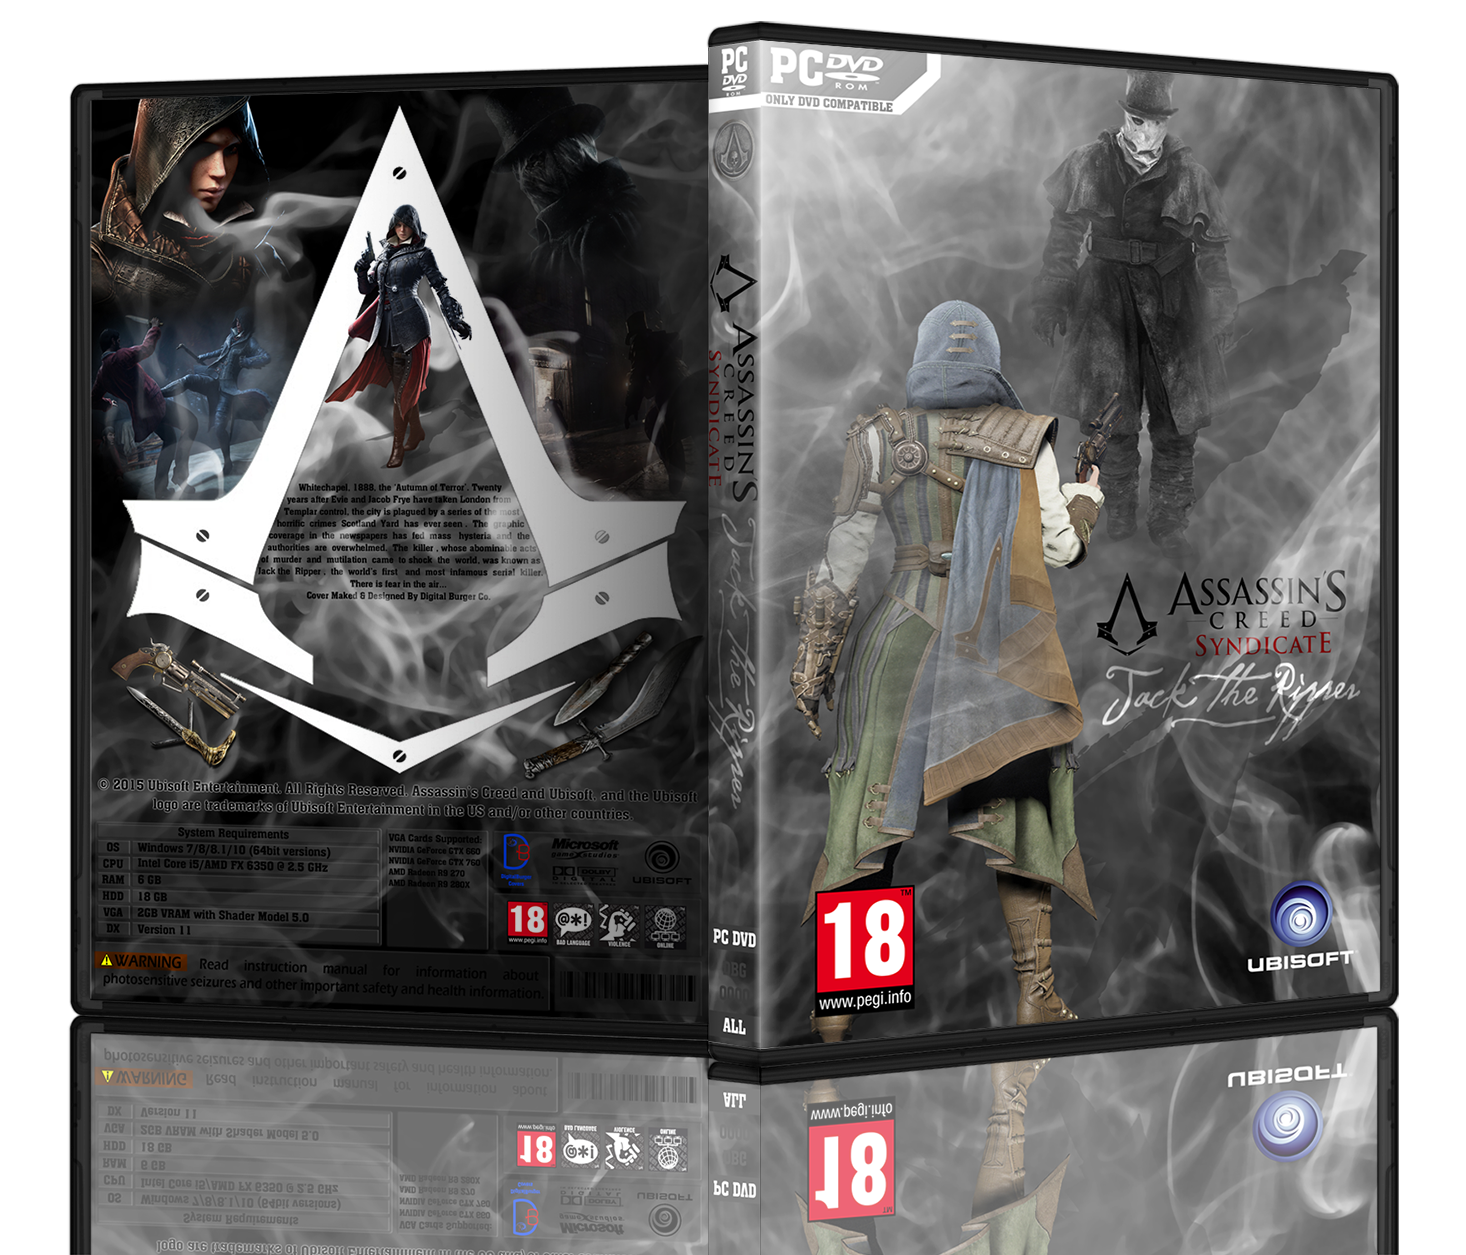 Assassin's Creed Syndicate Jack The Ripper box cover